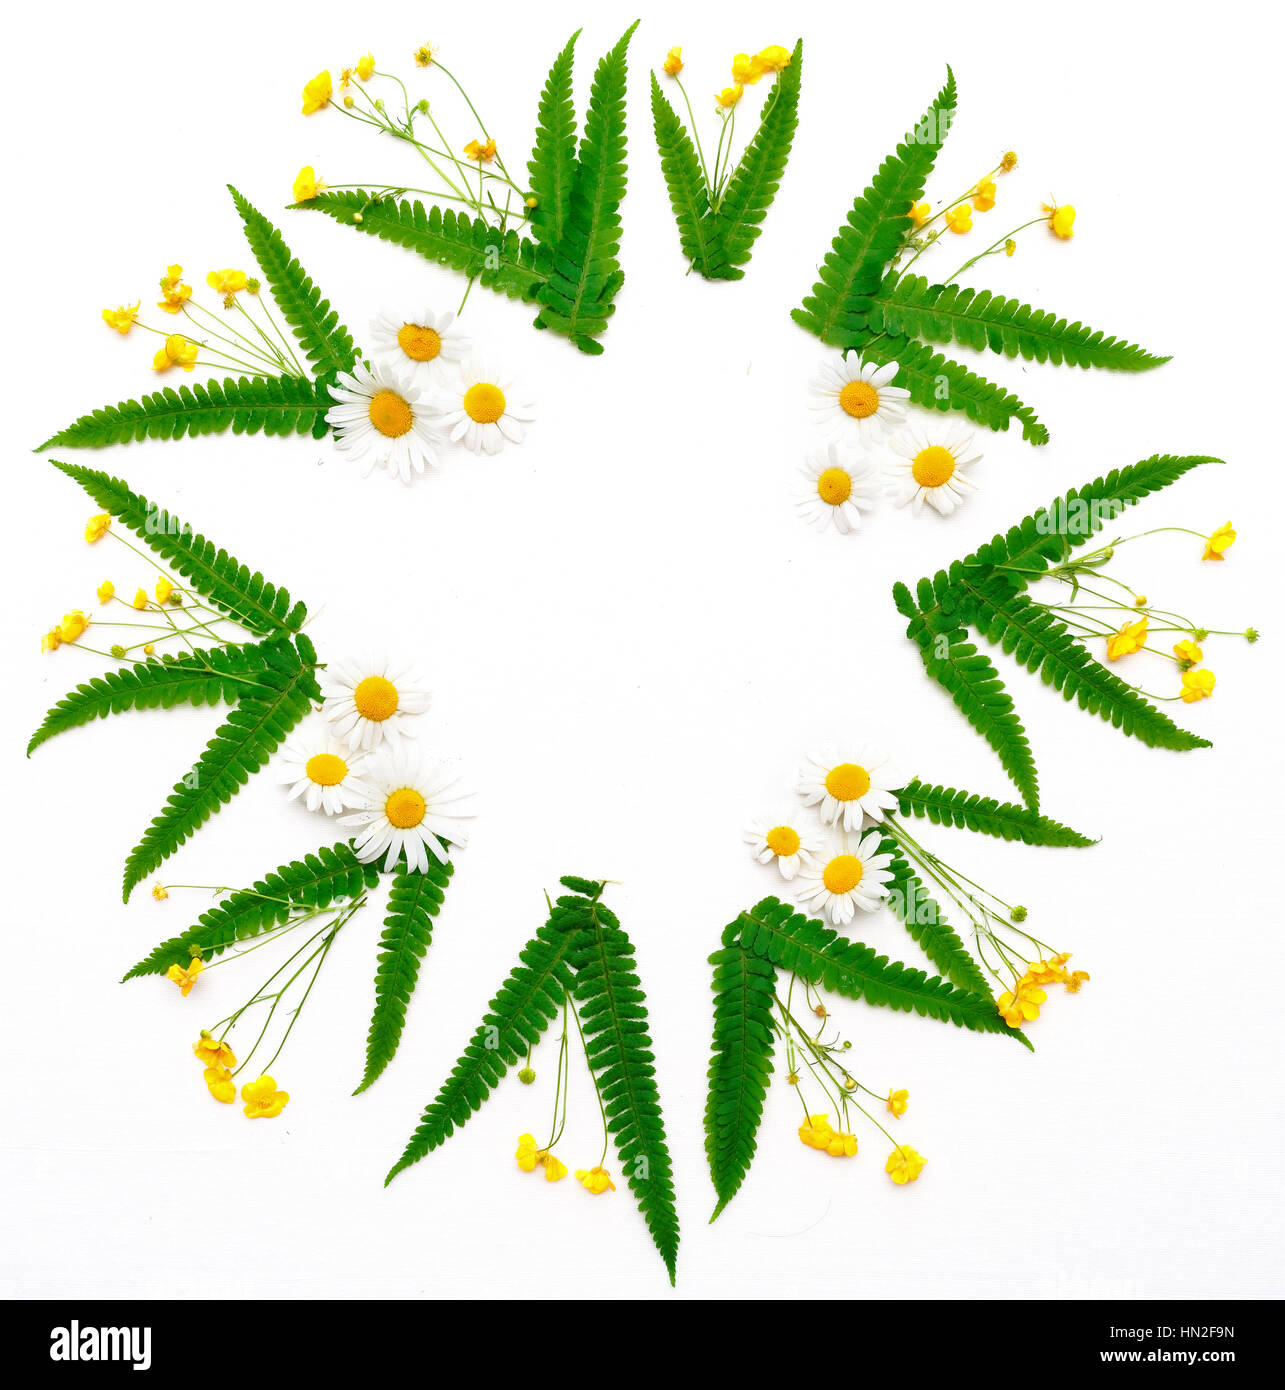 Wreath of ranunculus, chamomile and leaves of green fern on the white background. Flat lay. Stock Photo